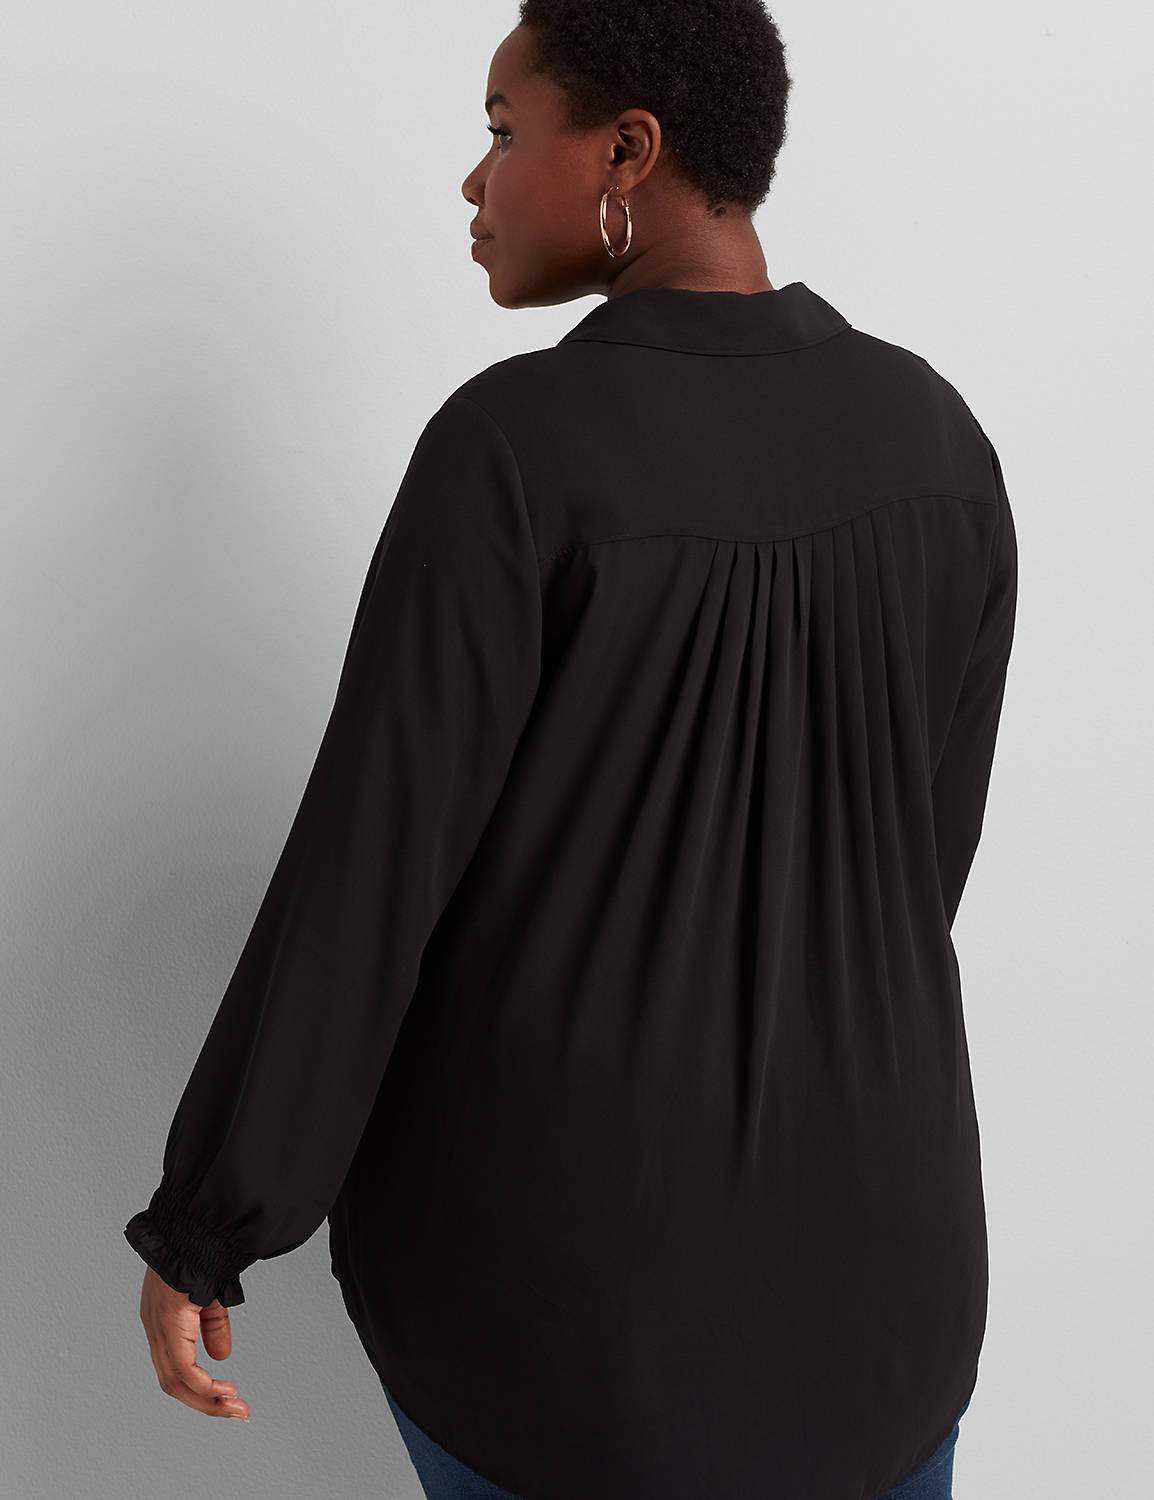 Long Sleeve Button Front Smock Cuff Soft Shirt1113940:Pitch Black LB 1000322:10/12 Product Image 2